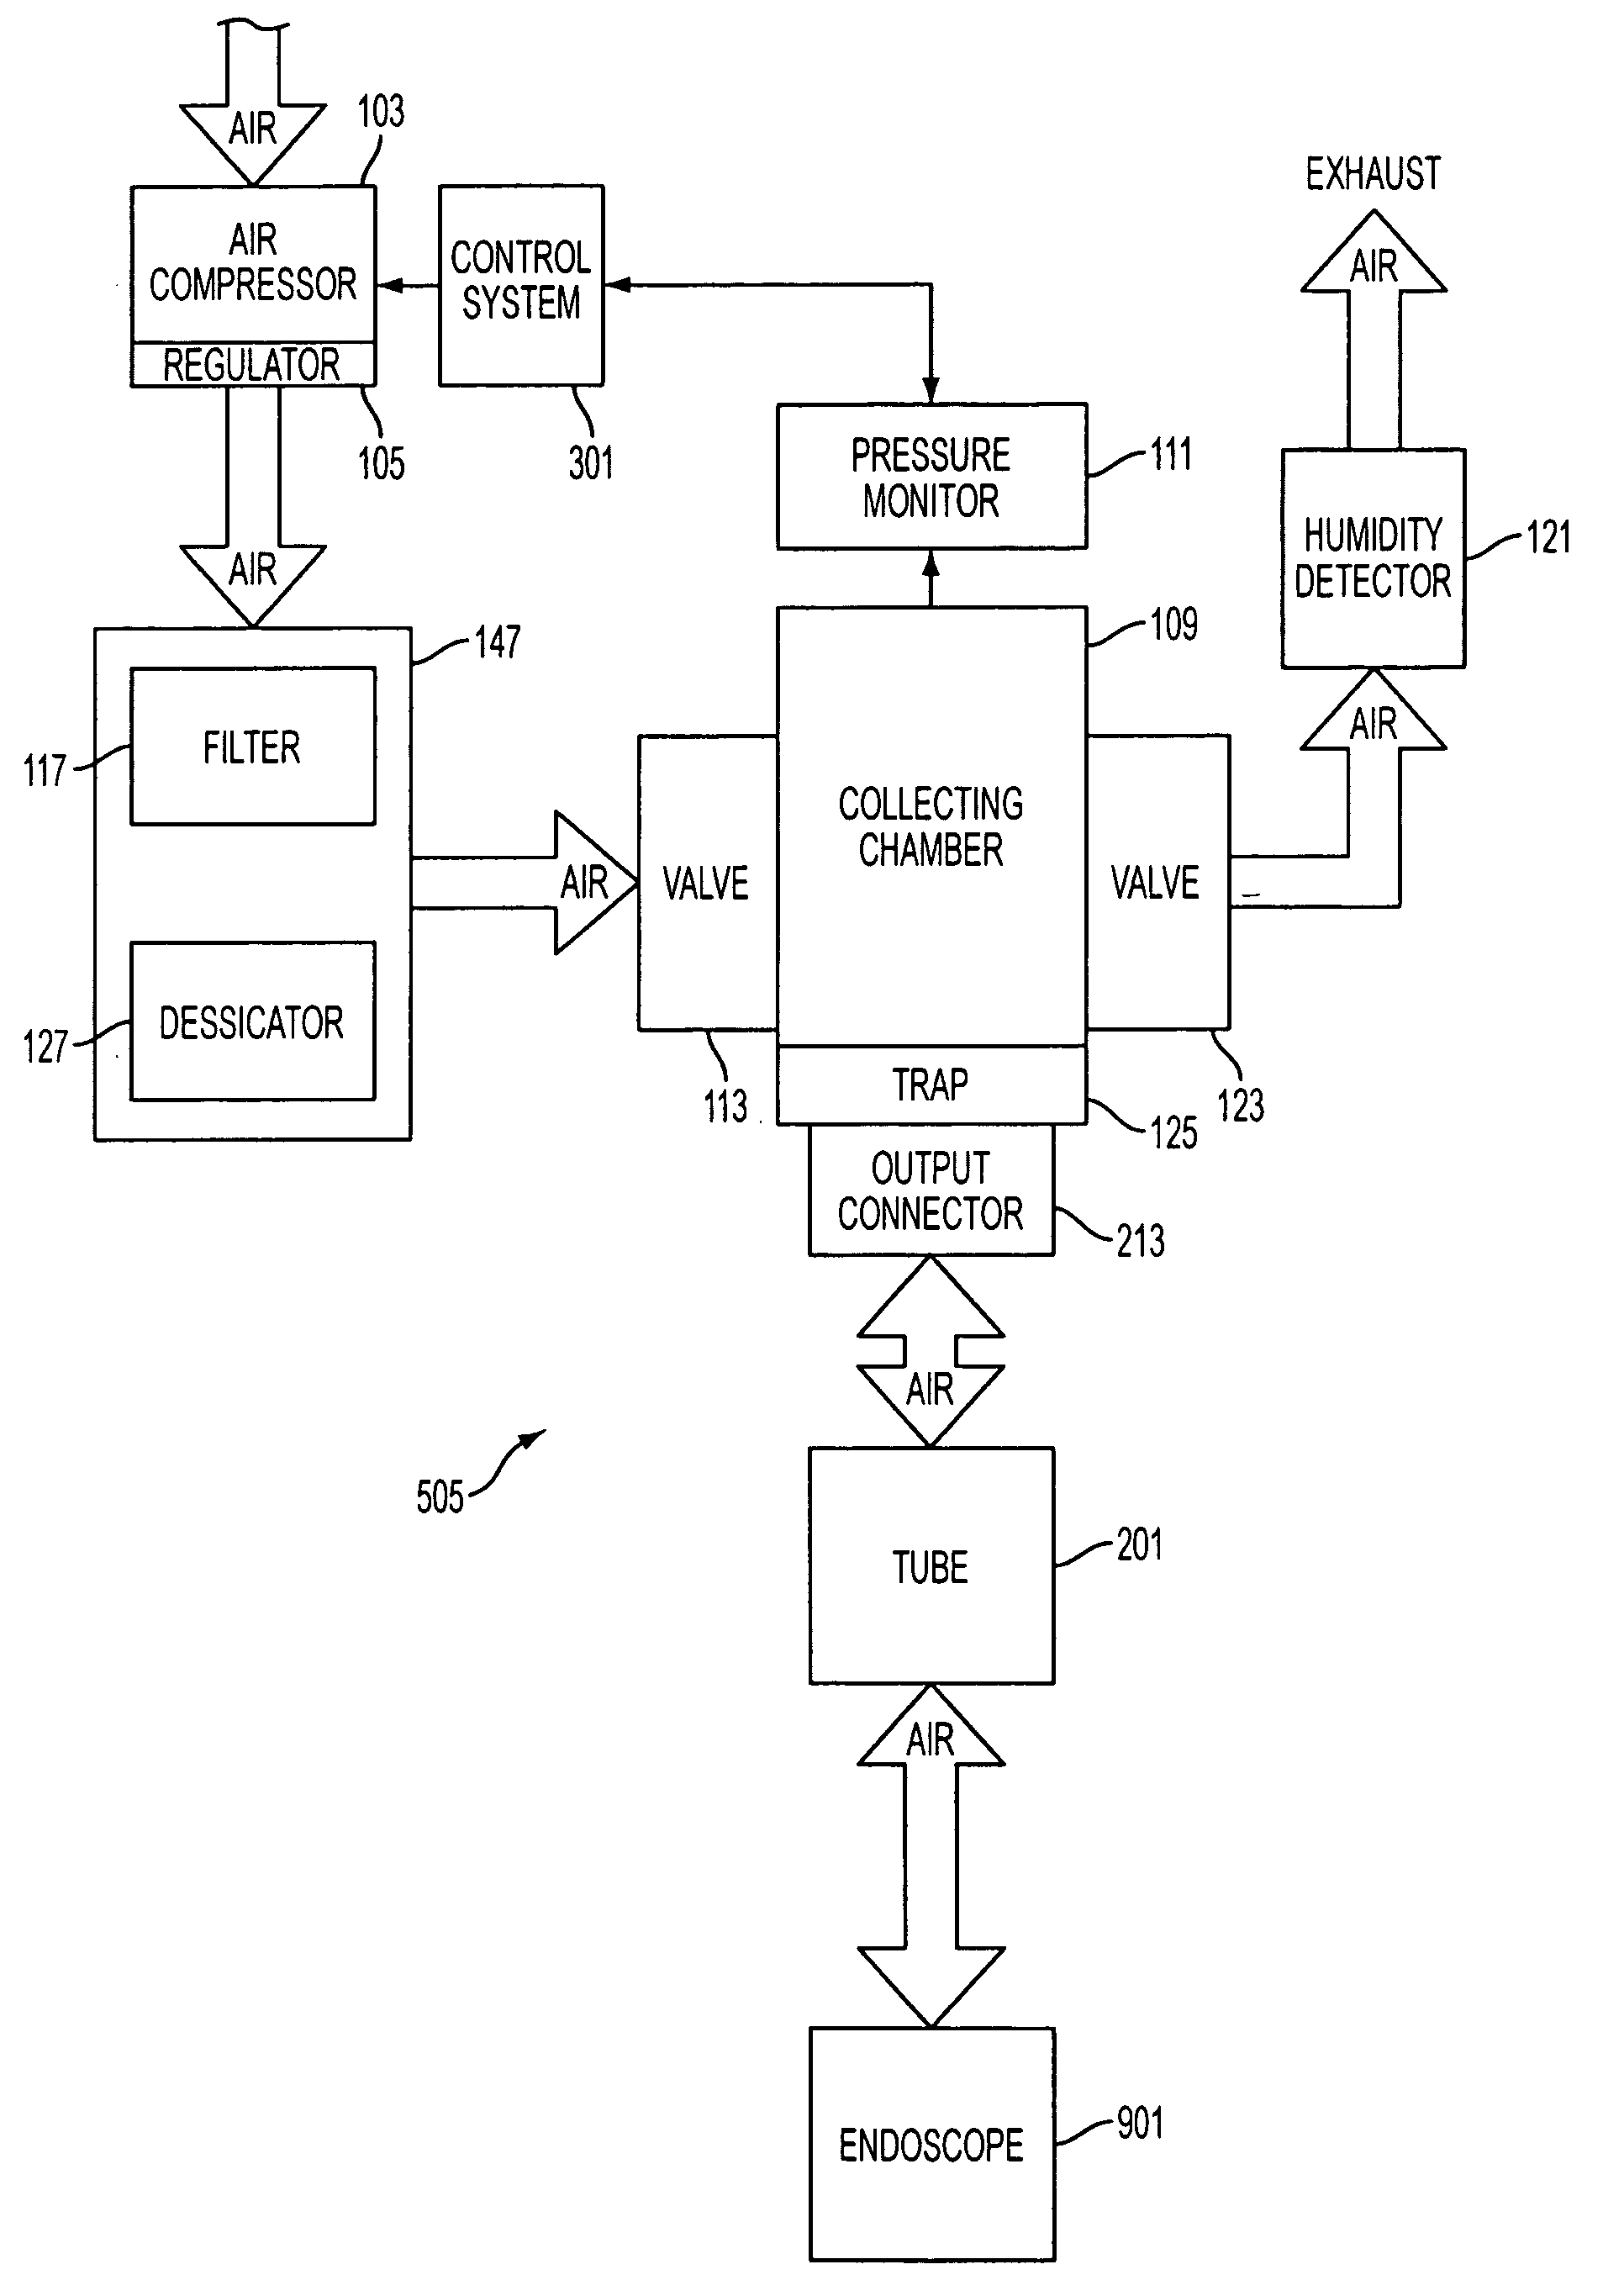 Systems and methods for endoscope integrity testing